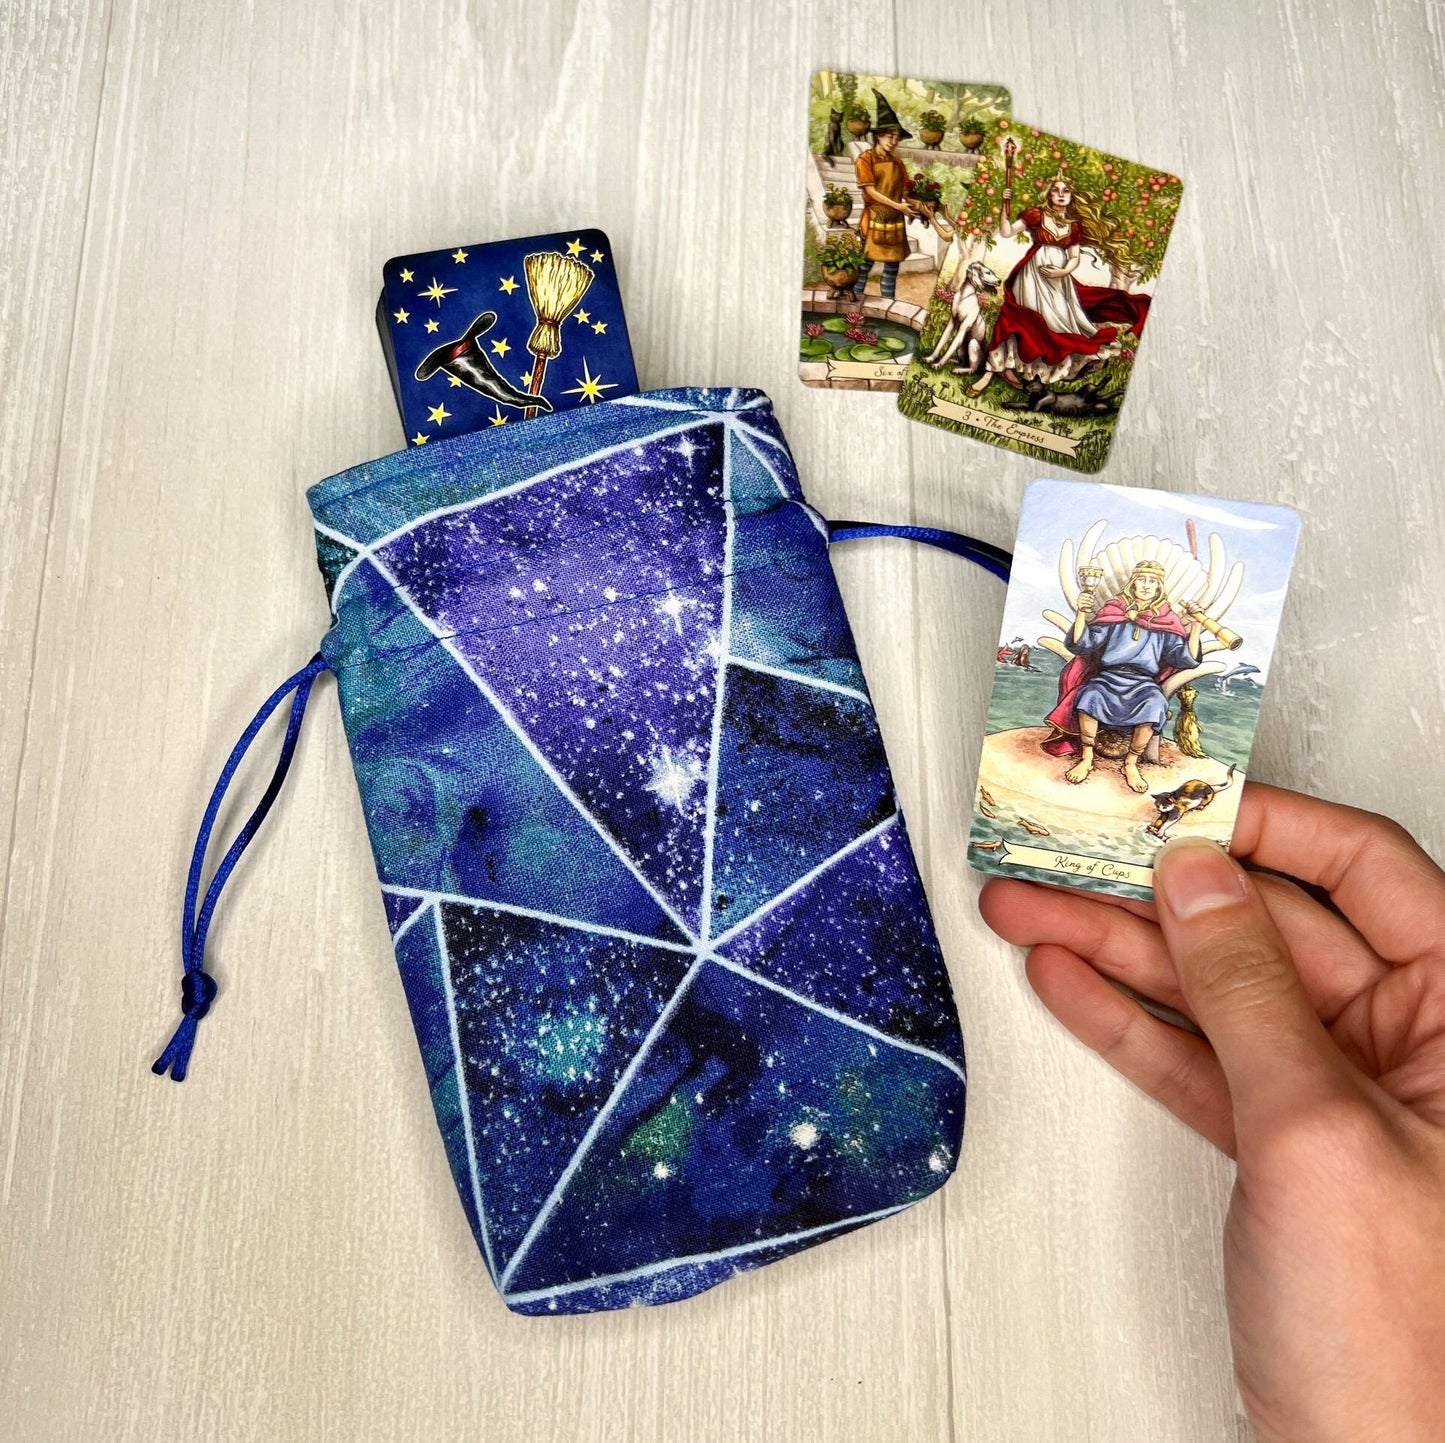 Blue Geometric Mini Tarot Deck Bag, Drawstring Pouch, Pocket Tarot, Dice Rune Bag, Witchcraft Wiccan Pagan Supplies Gifts, Divination Tools